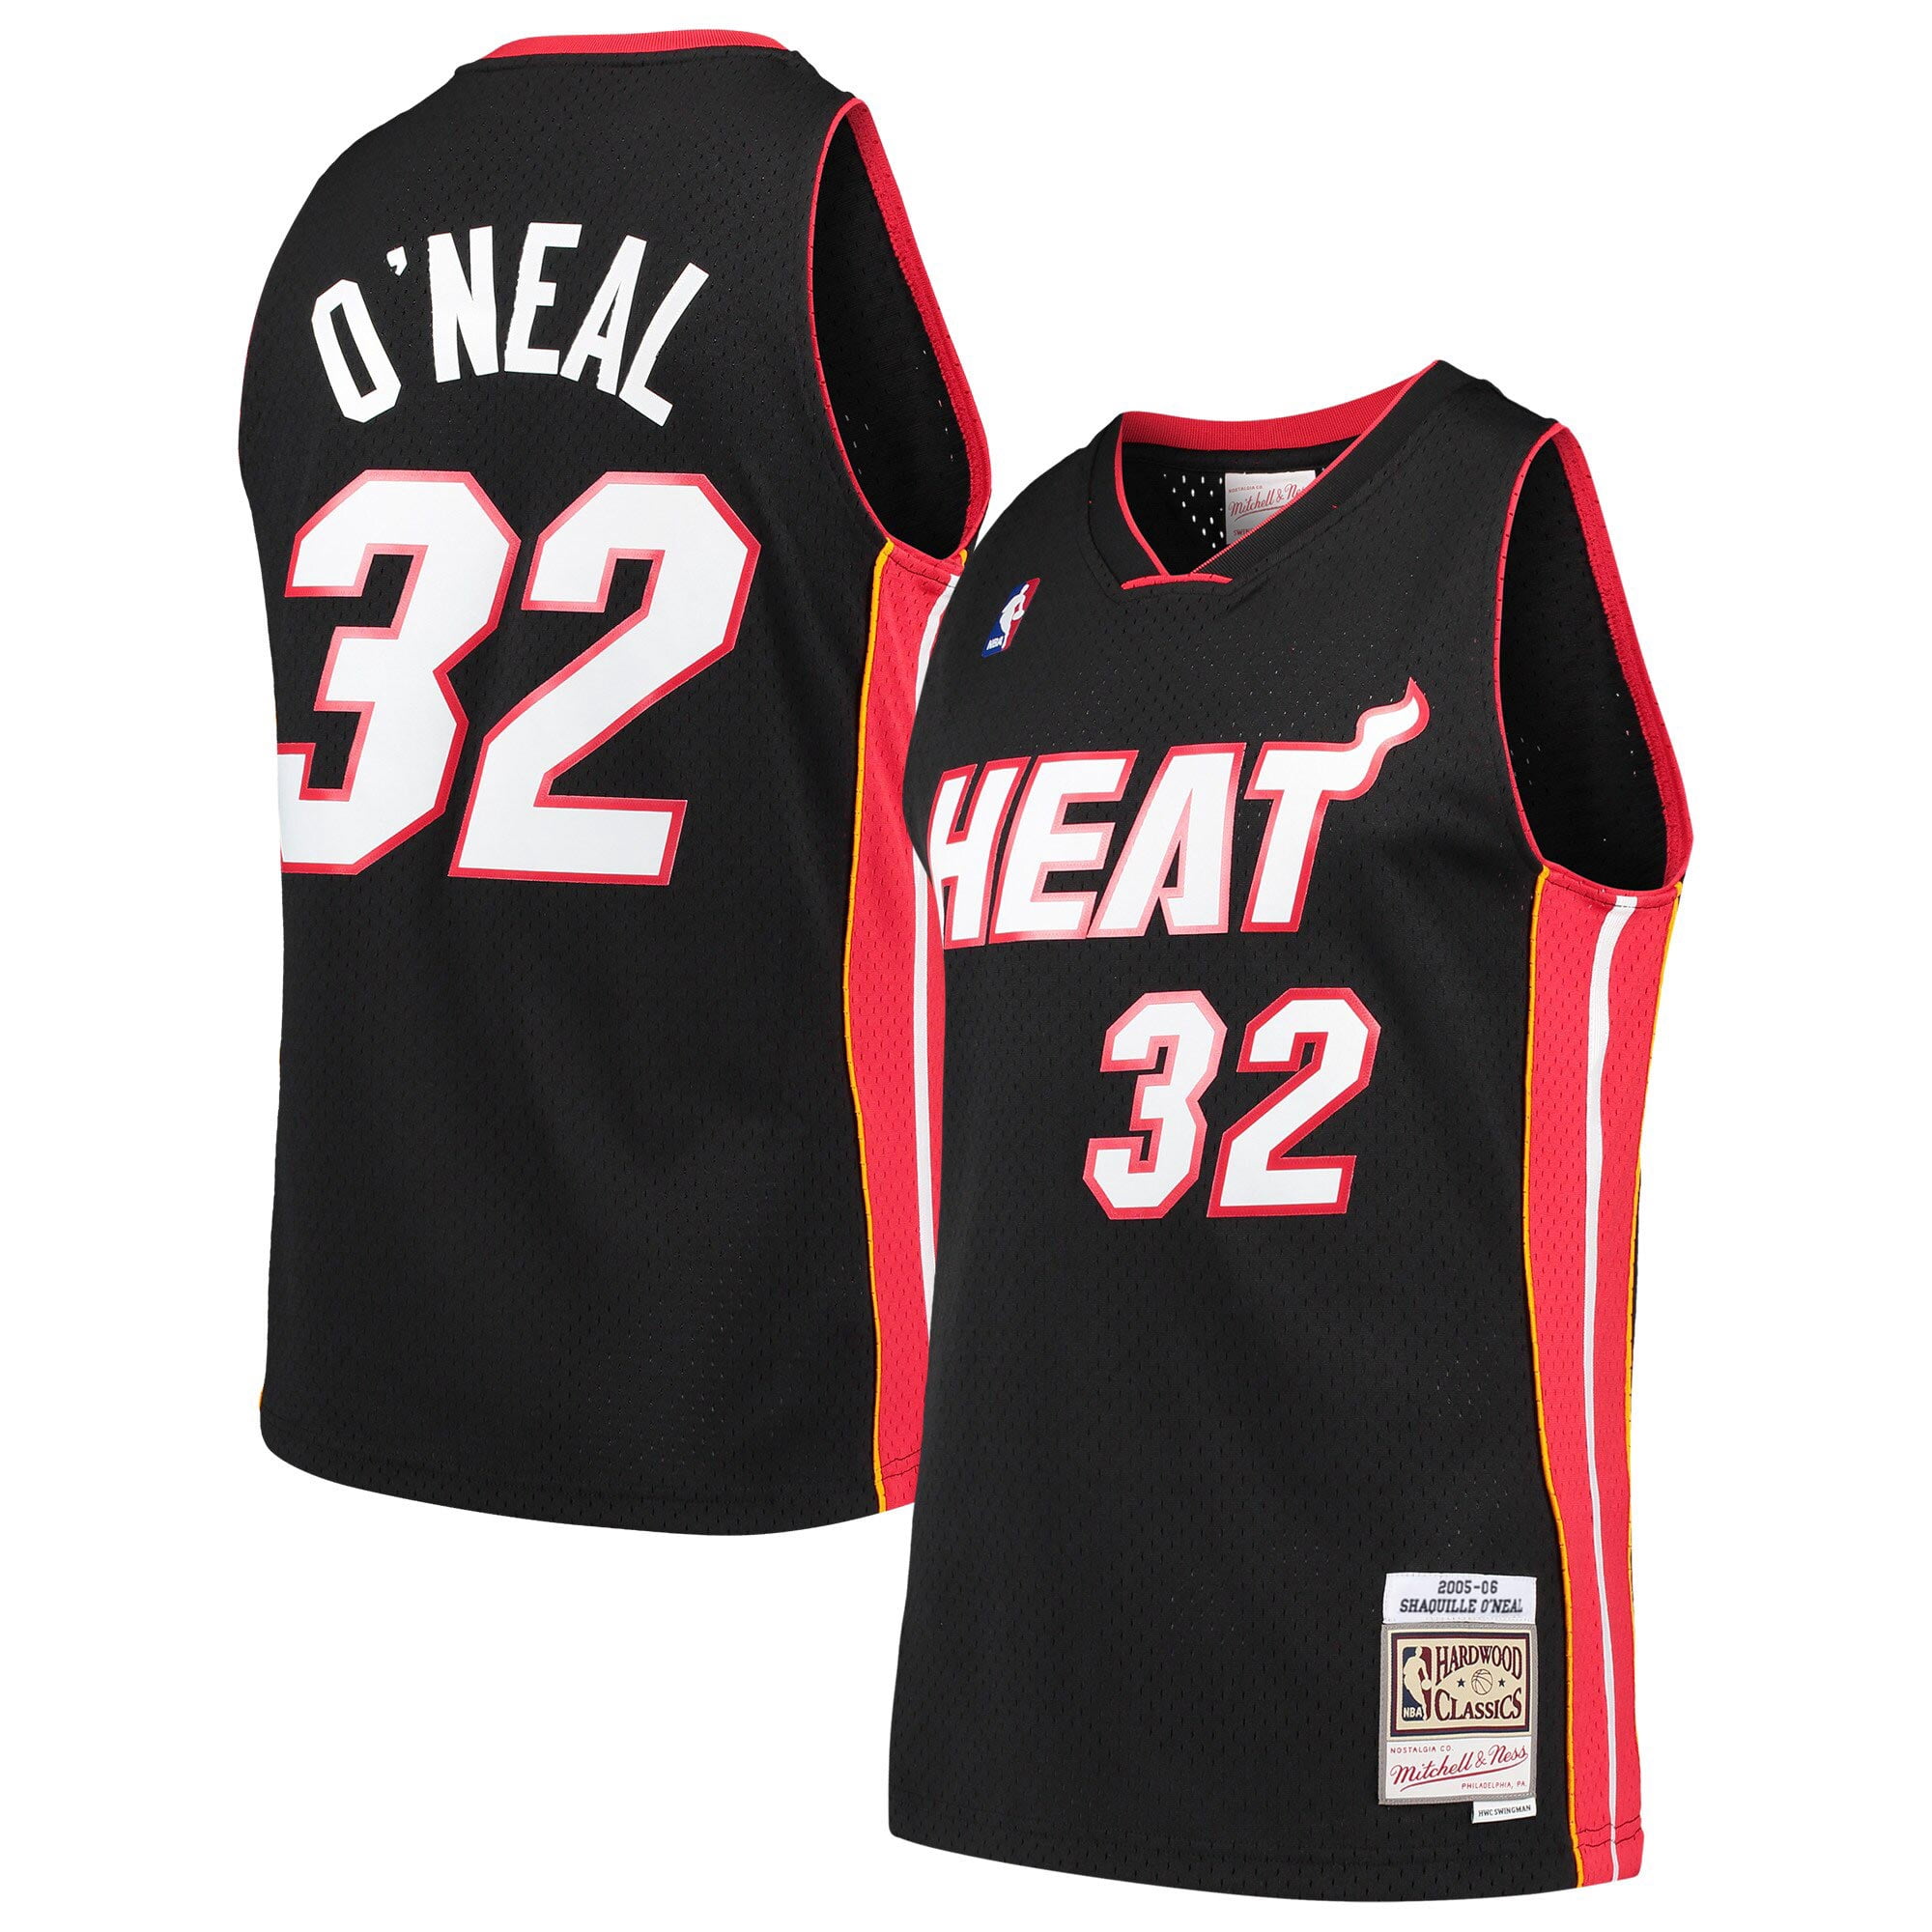  Your Fan Shop for Miami Heat